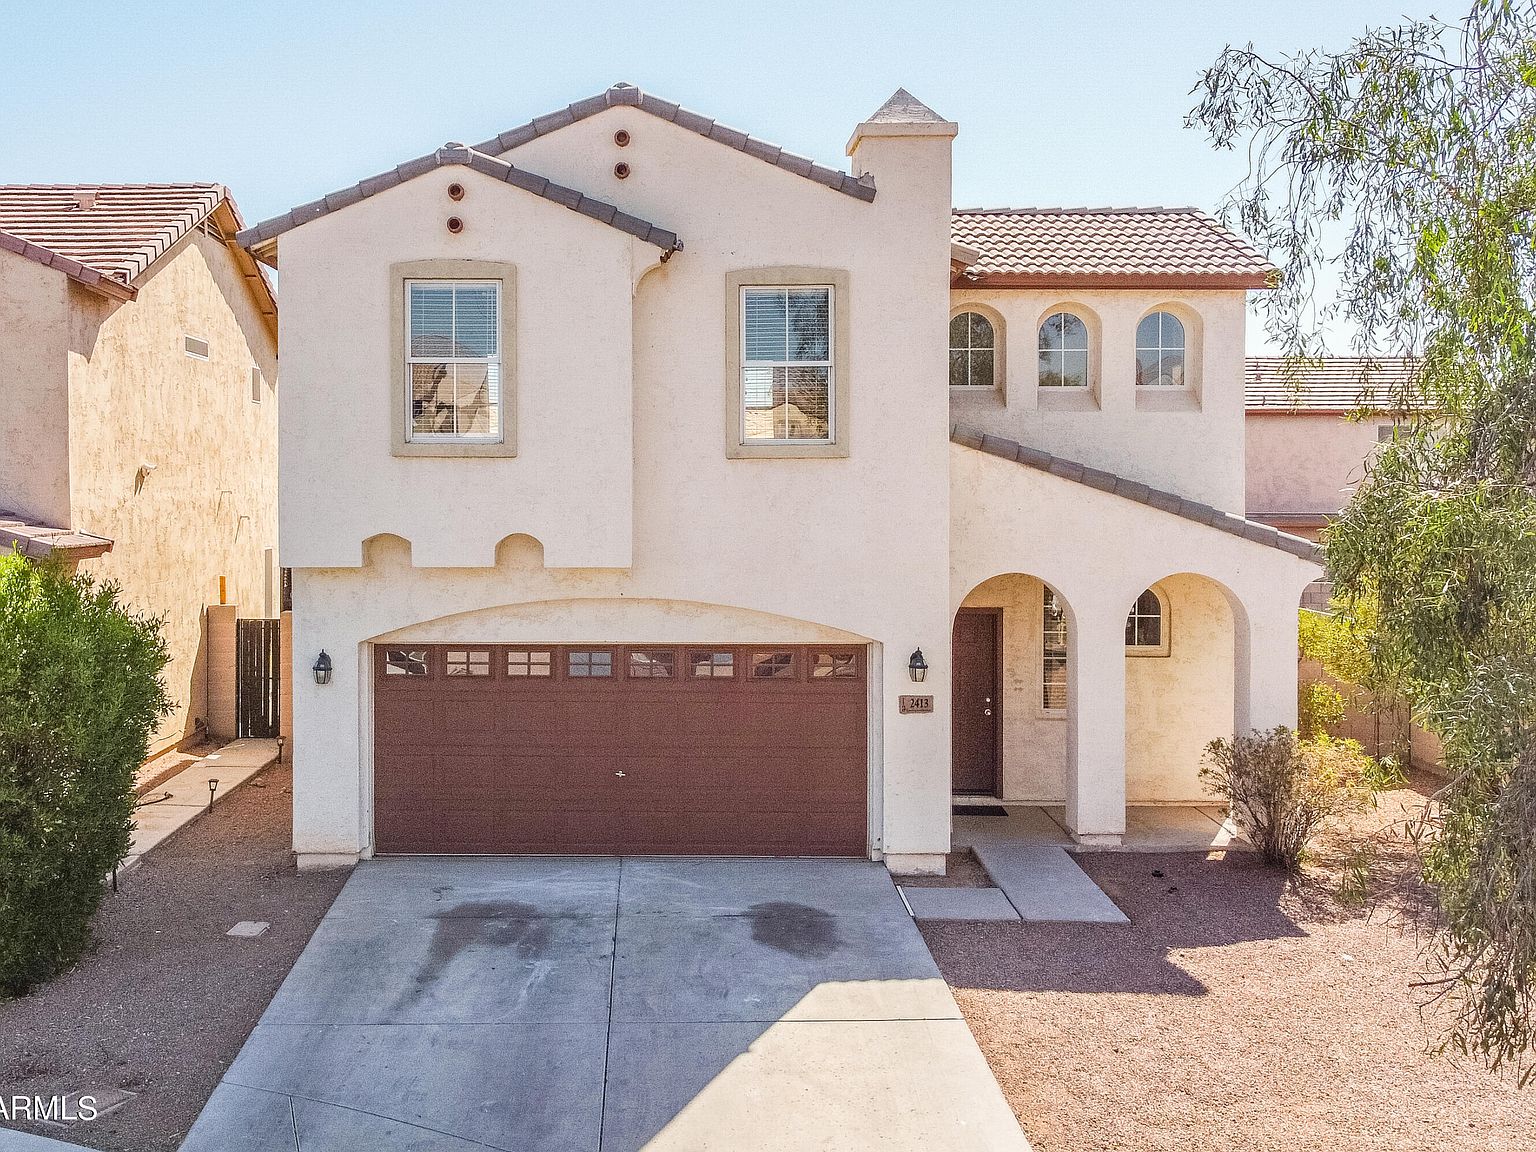 2413 S 90th Gln Tolleson Az Zillow